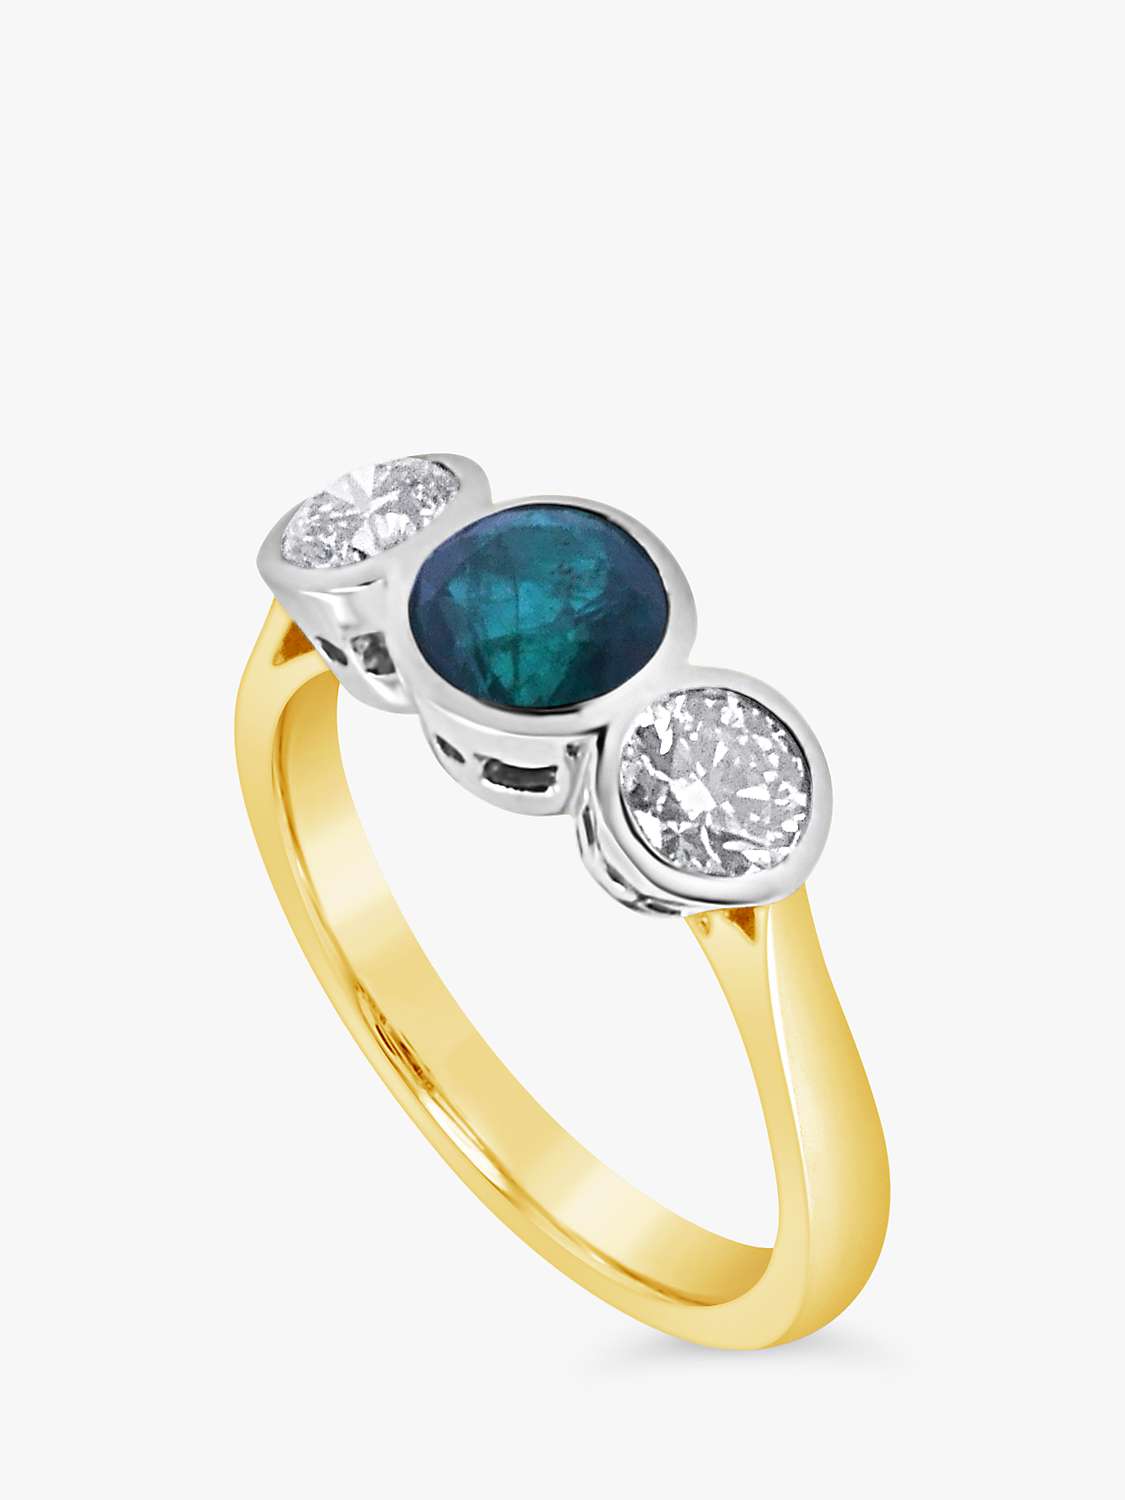 Buy Milton & Humble Jewellery 18ct White and Yellow Gold Second Hand Emerald and Diamond Ring Online at johnlewis.com